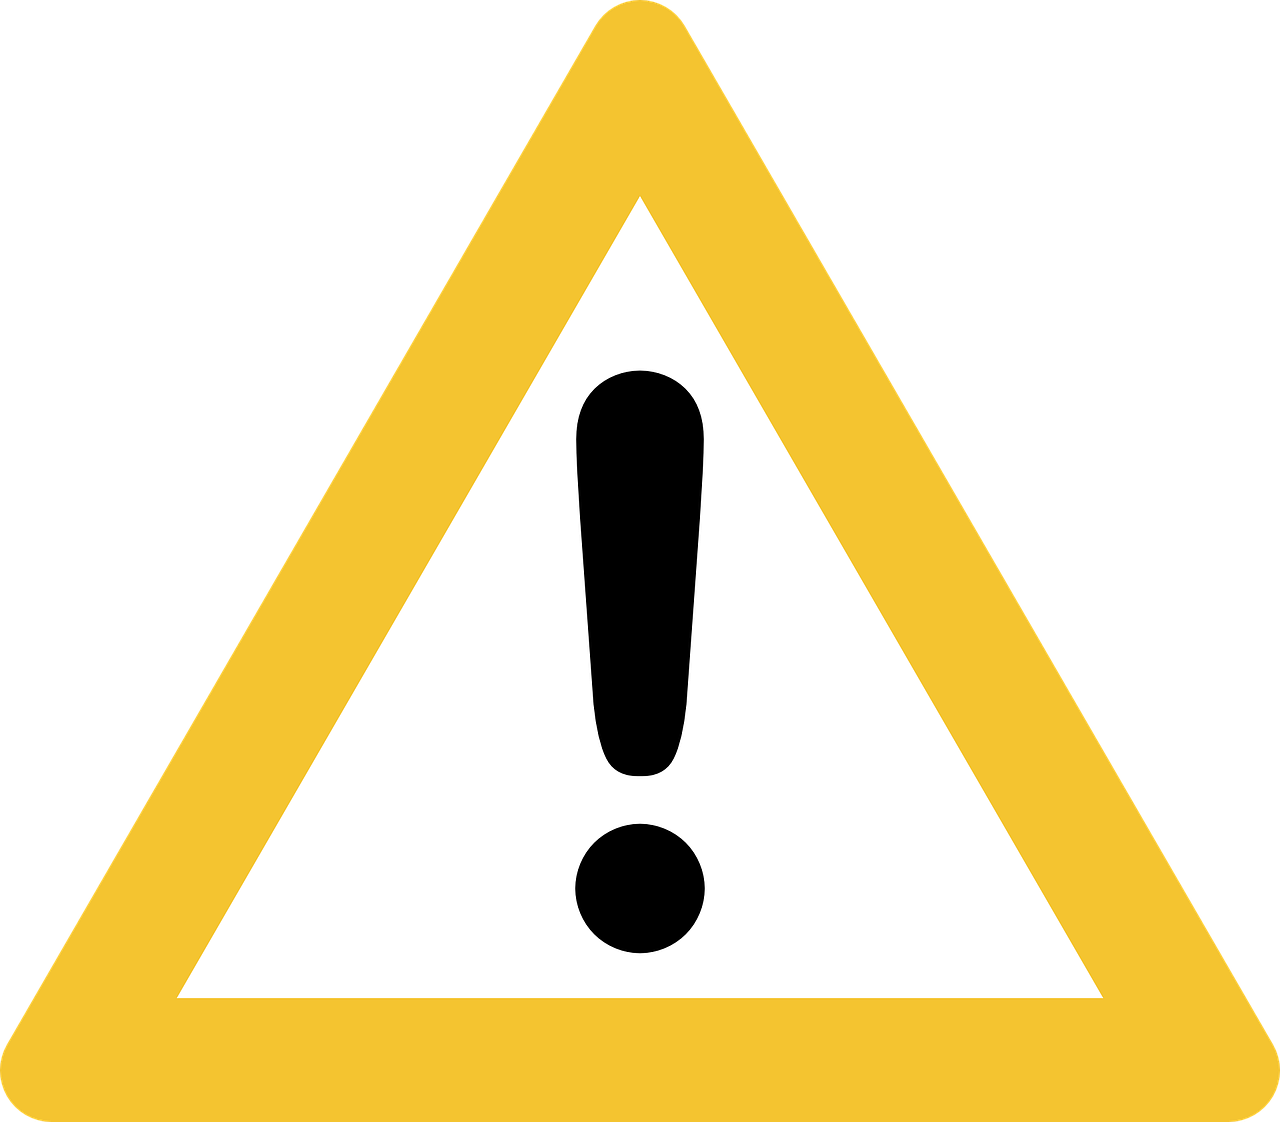 A Yellow Triangle With A Black Exclamation Mark